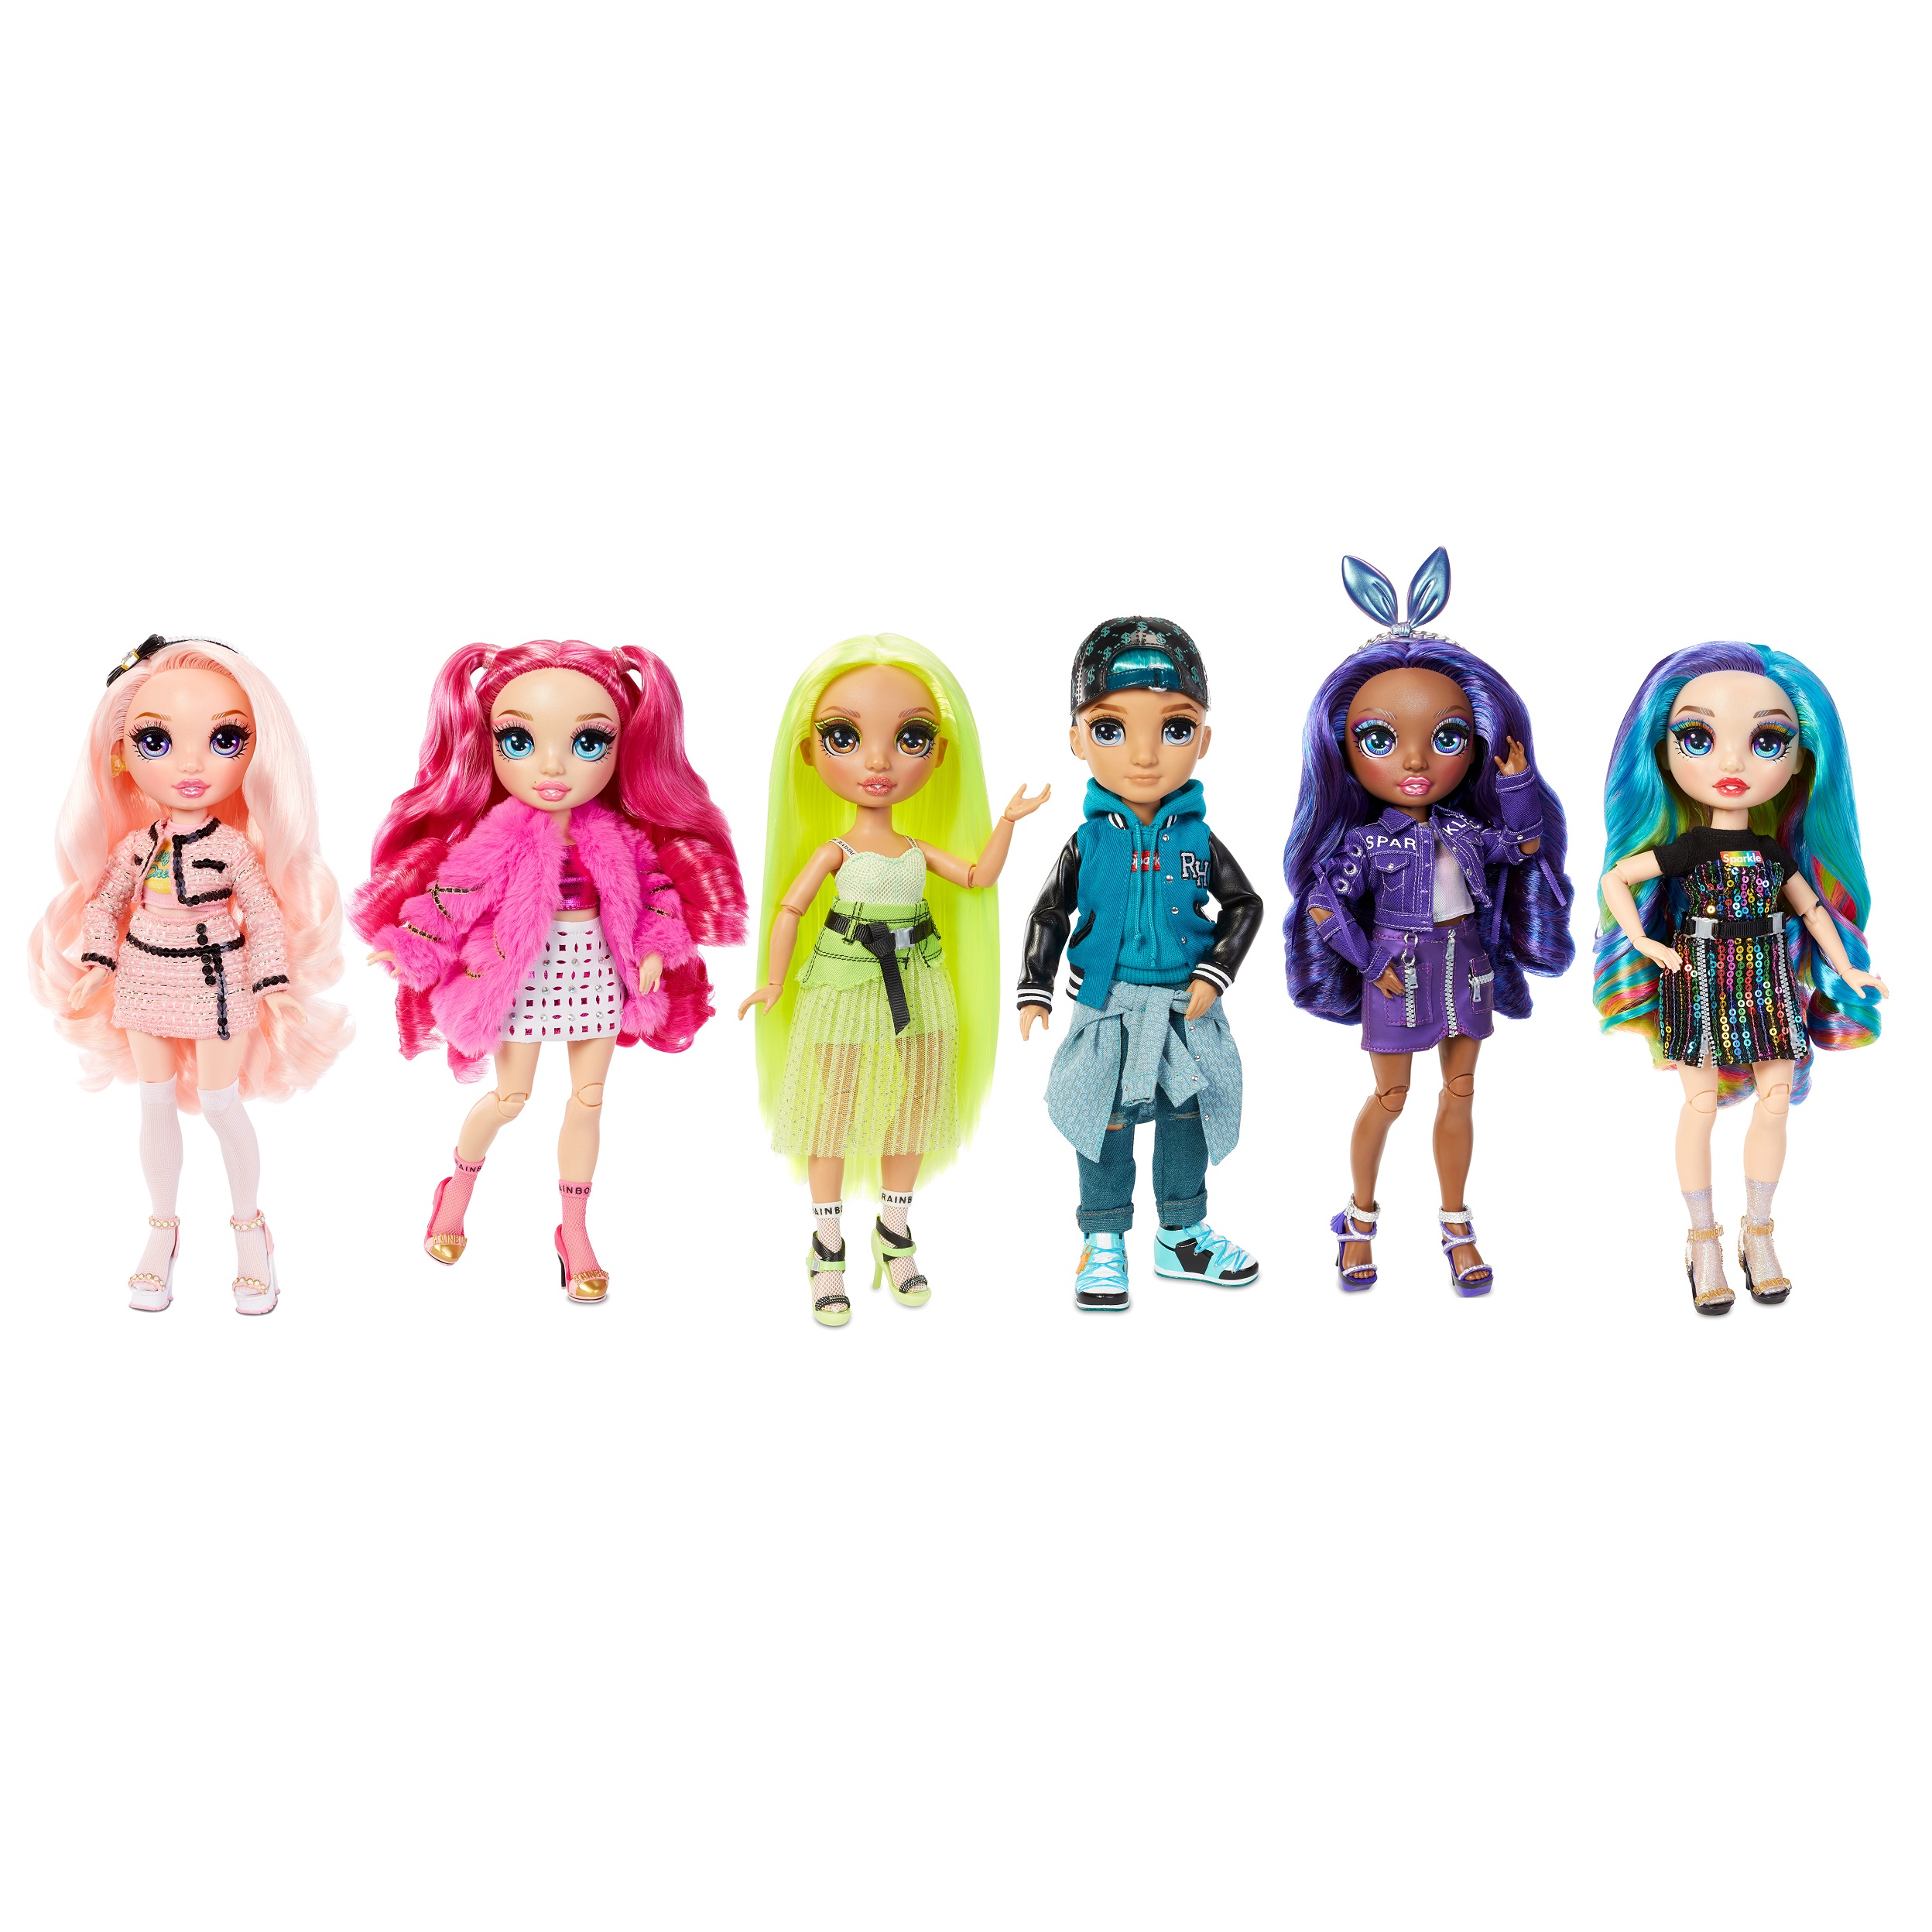 Rainbow High Karma Nichols – Neon Green Fashion Doll with 2 Complete Mix & Match Outfits and Accessories, Toys for Kids 6-12 Years Old - image 8 of 9